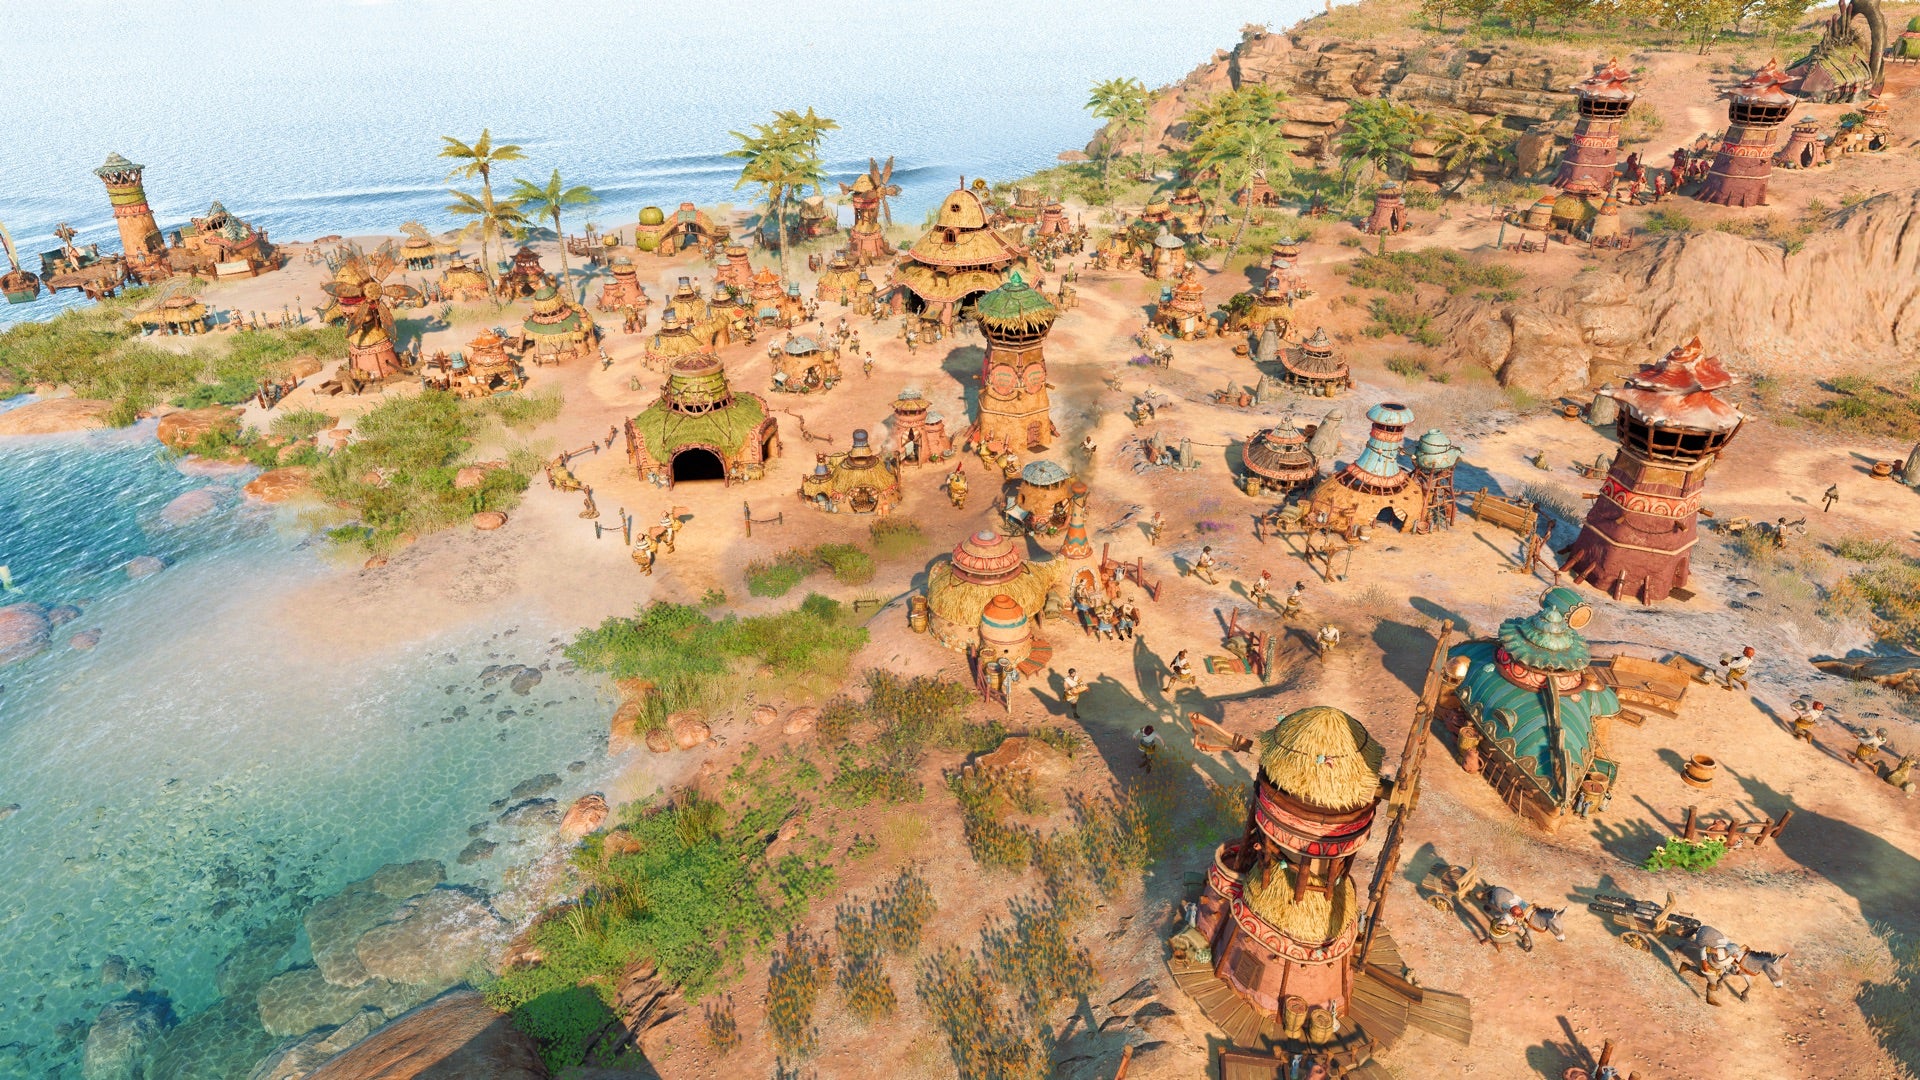 Image for Ubisoft's much-delayed The Settlers reboot now aiming for February 2023 on PC